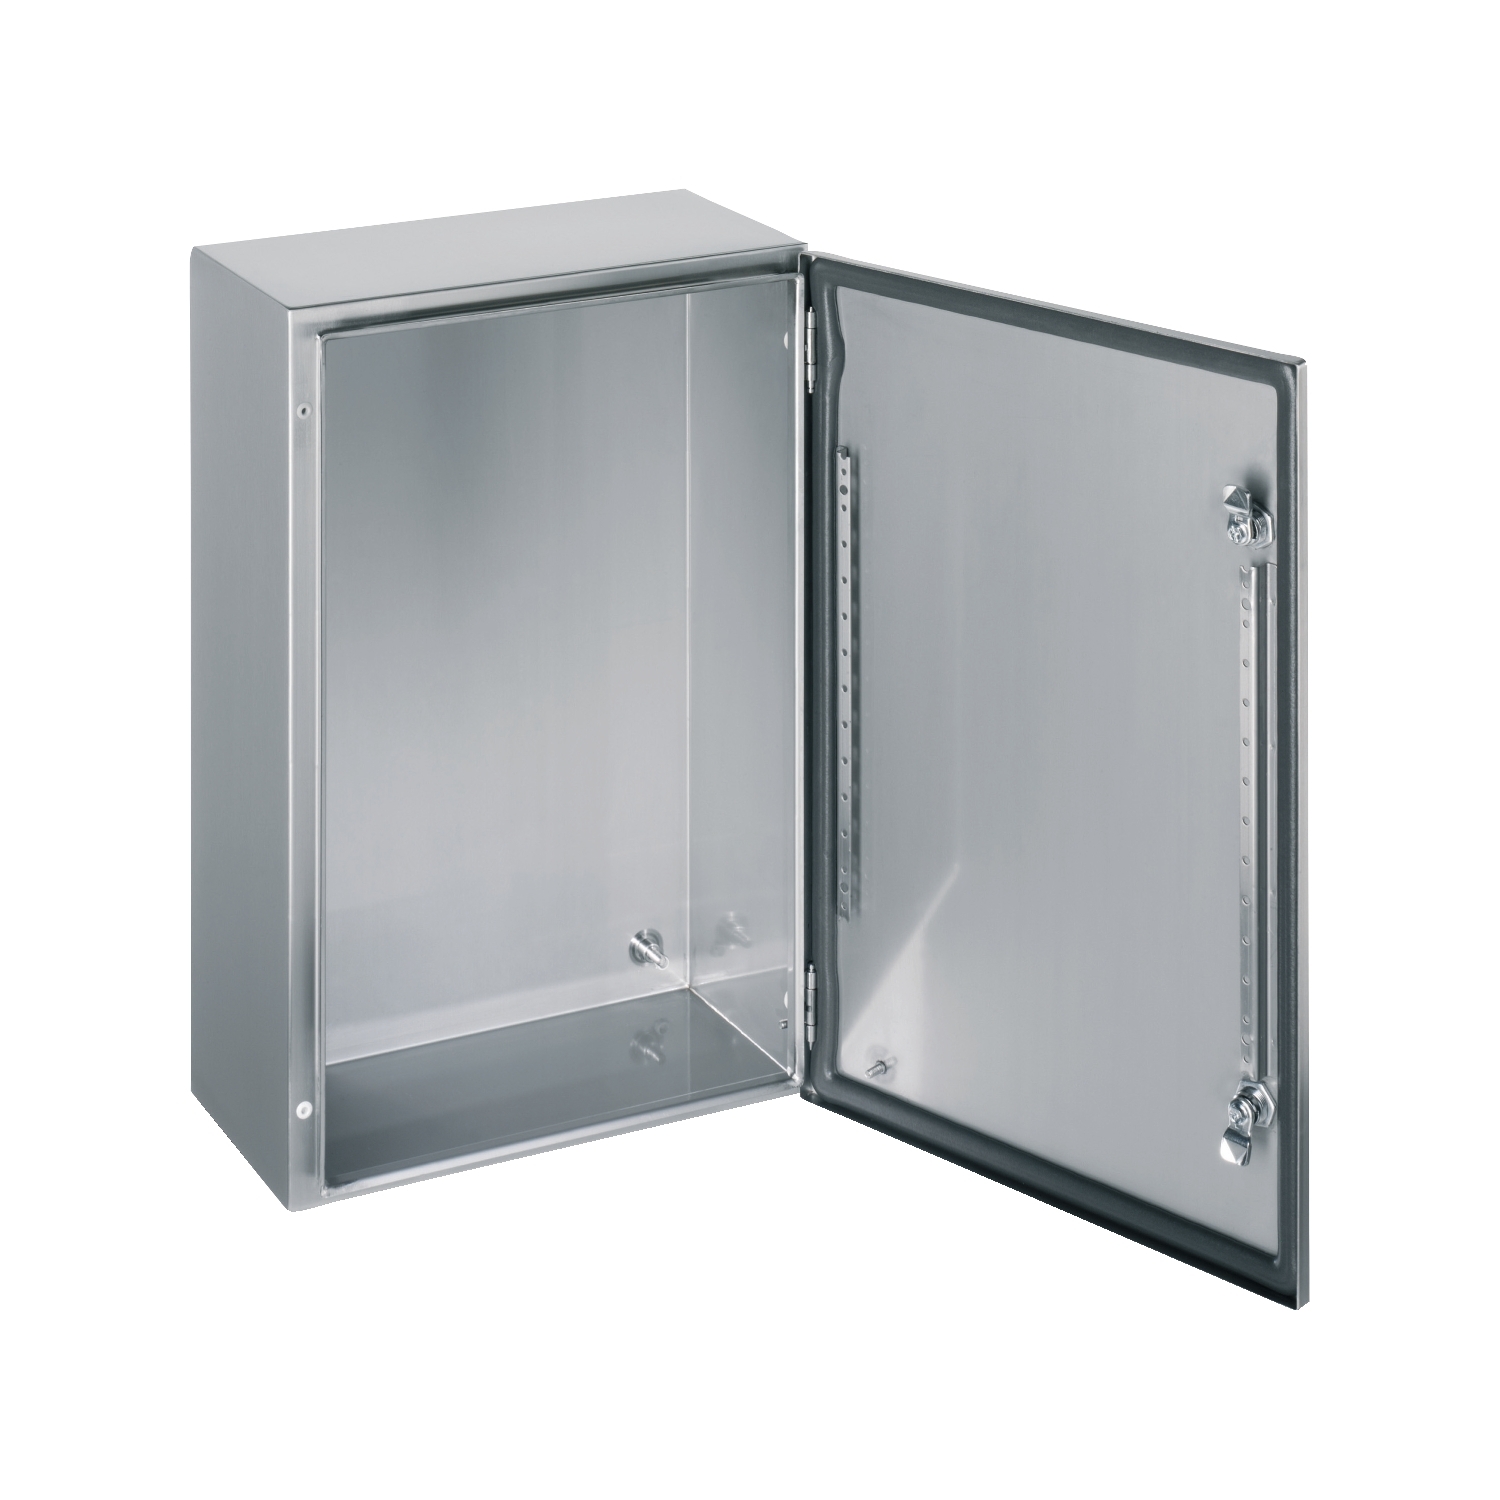 Wall mounted enclosure, Spacial S3X, stainless steel 316L, plain door, 1000x800x300mm, IP66